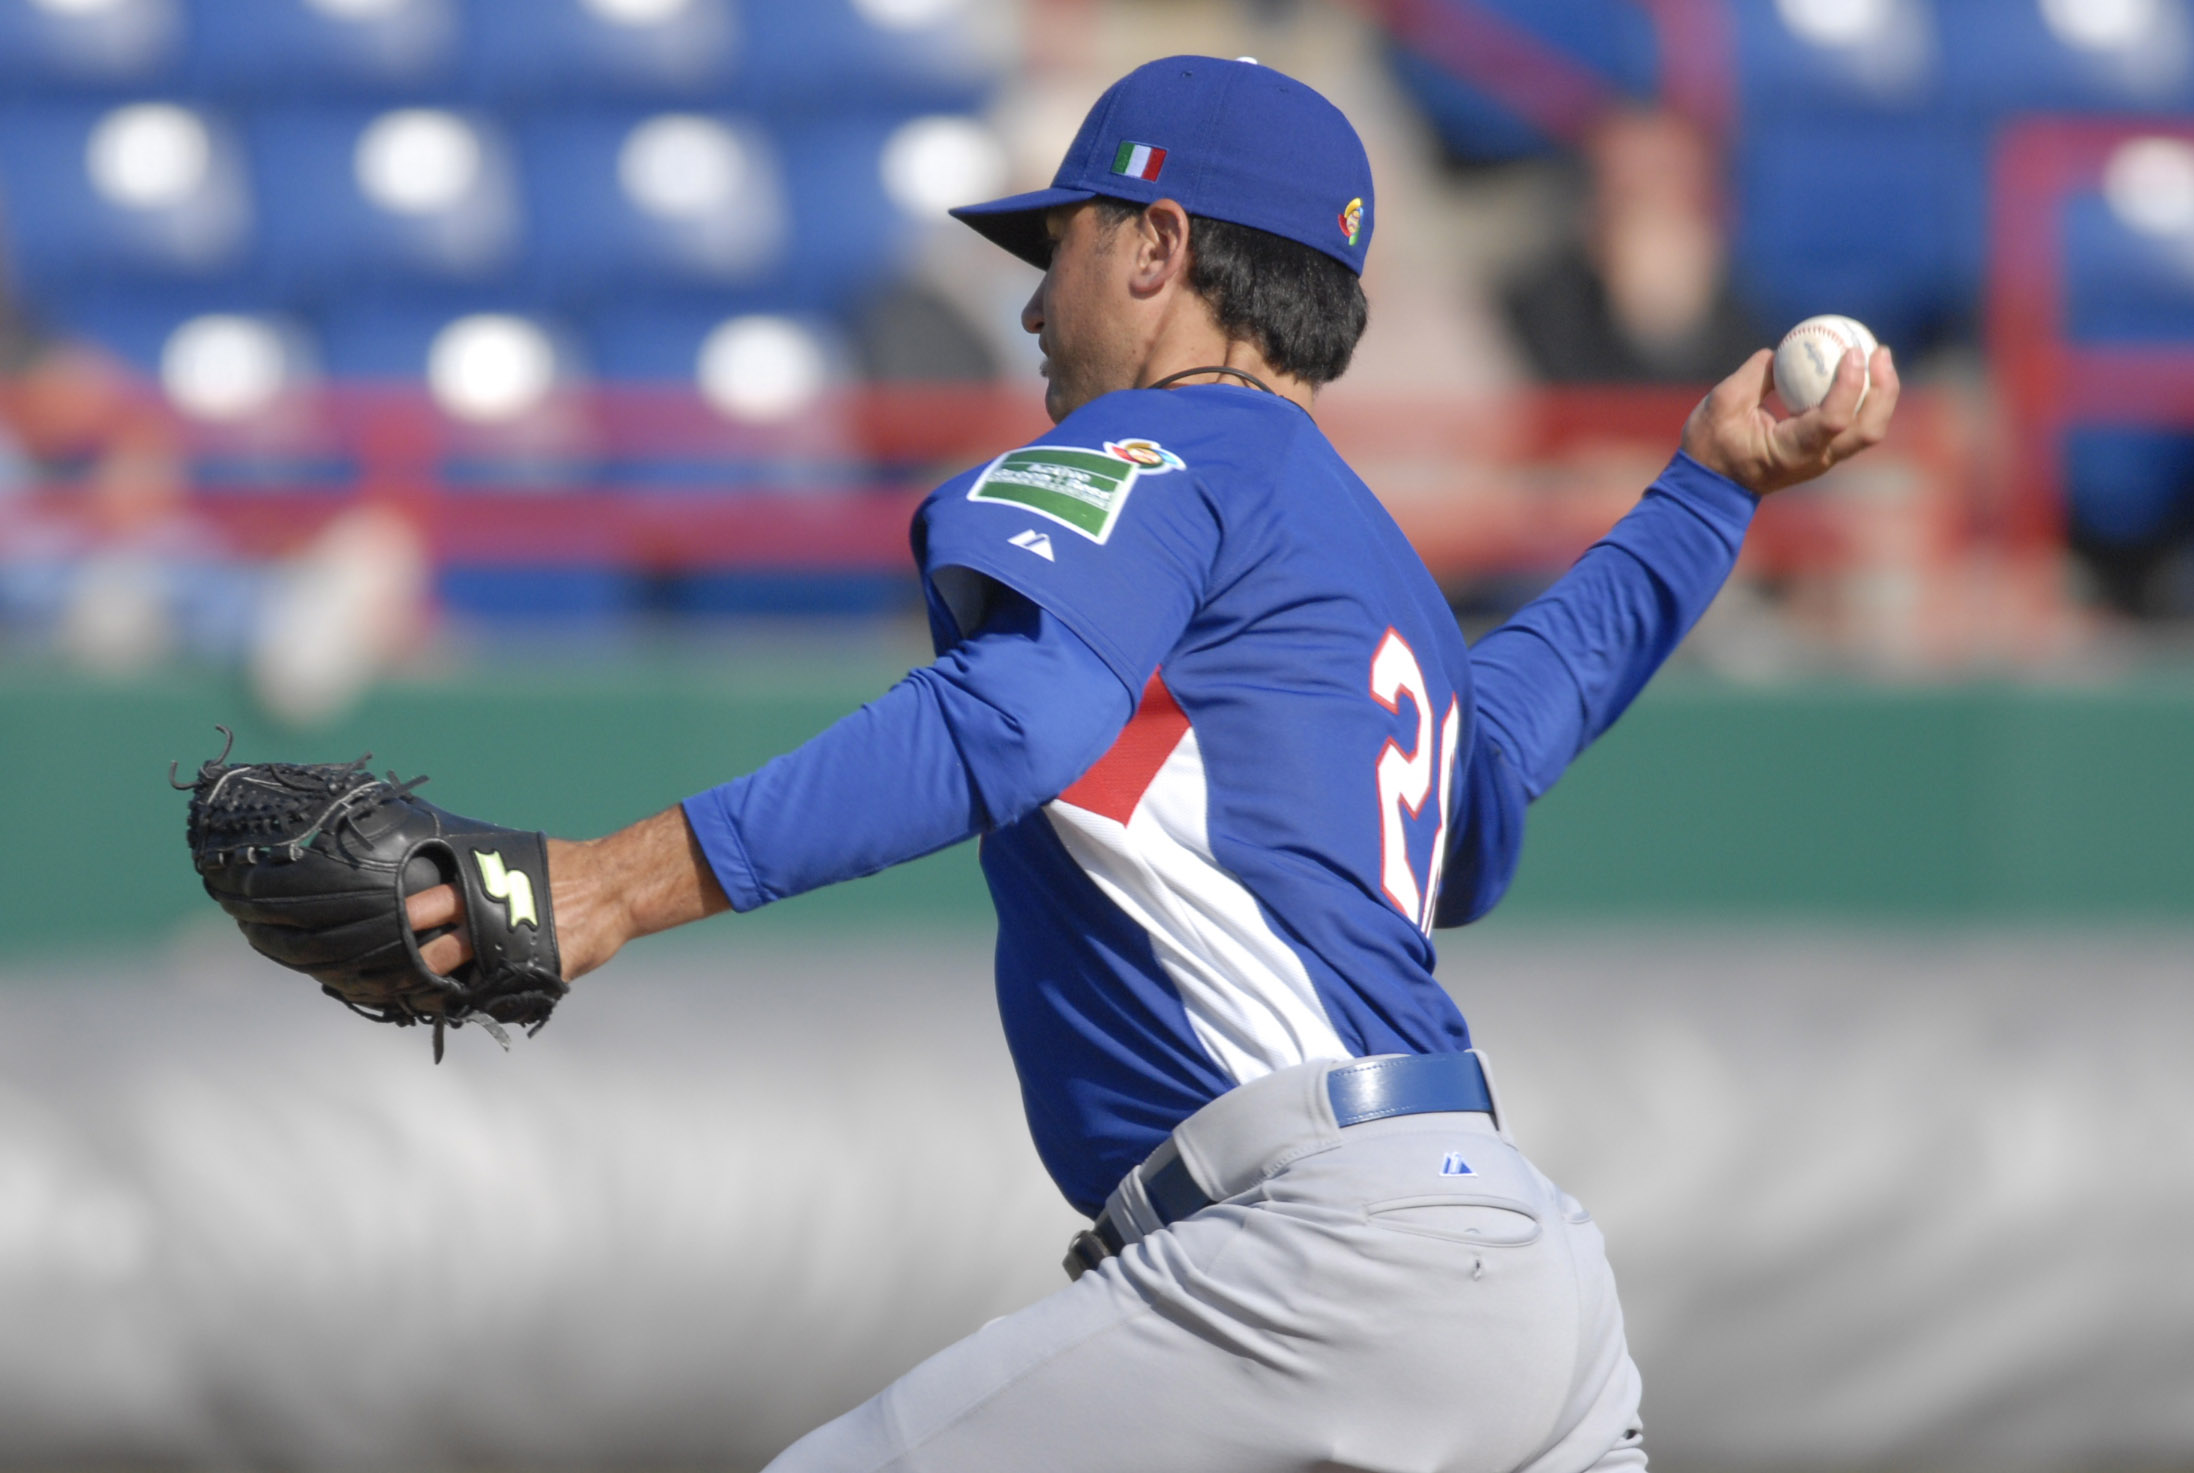 Cody Cillo pitching for Italy before WBC09